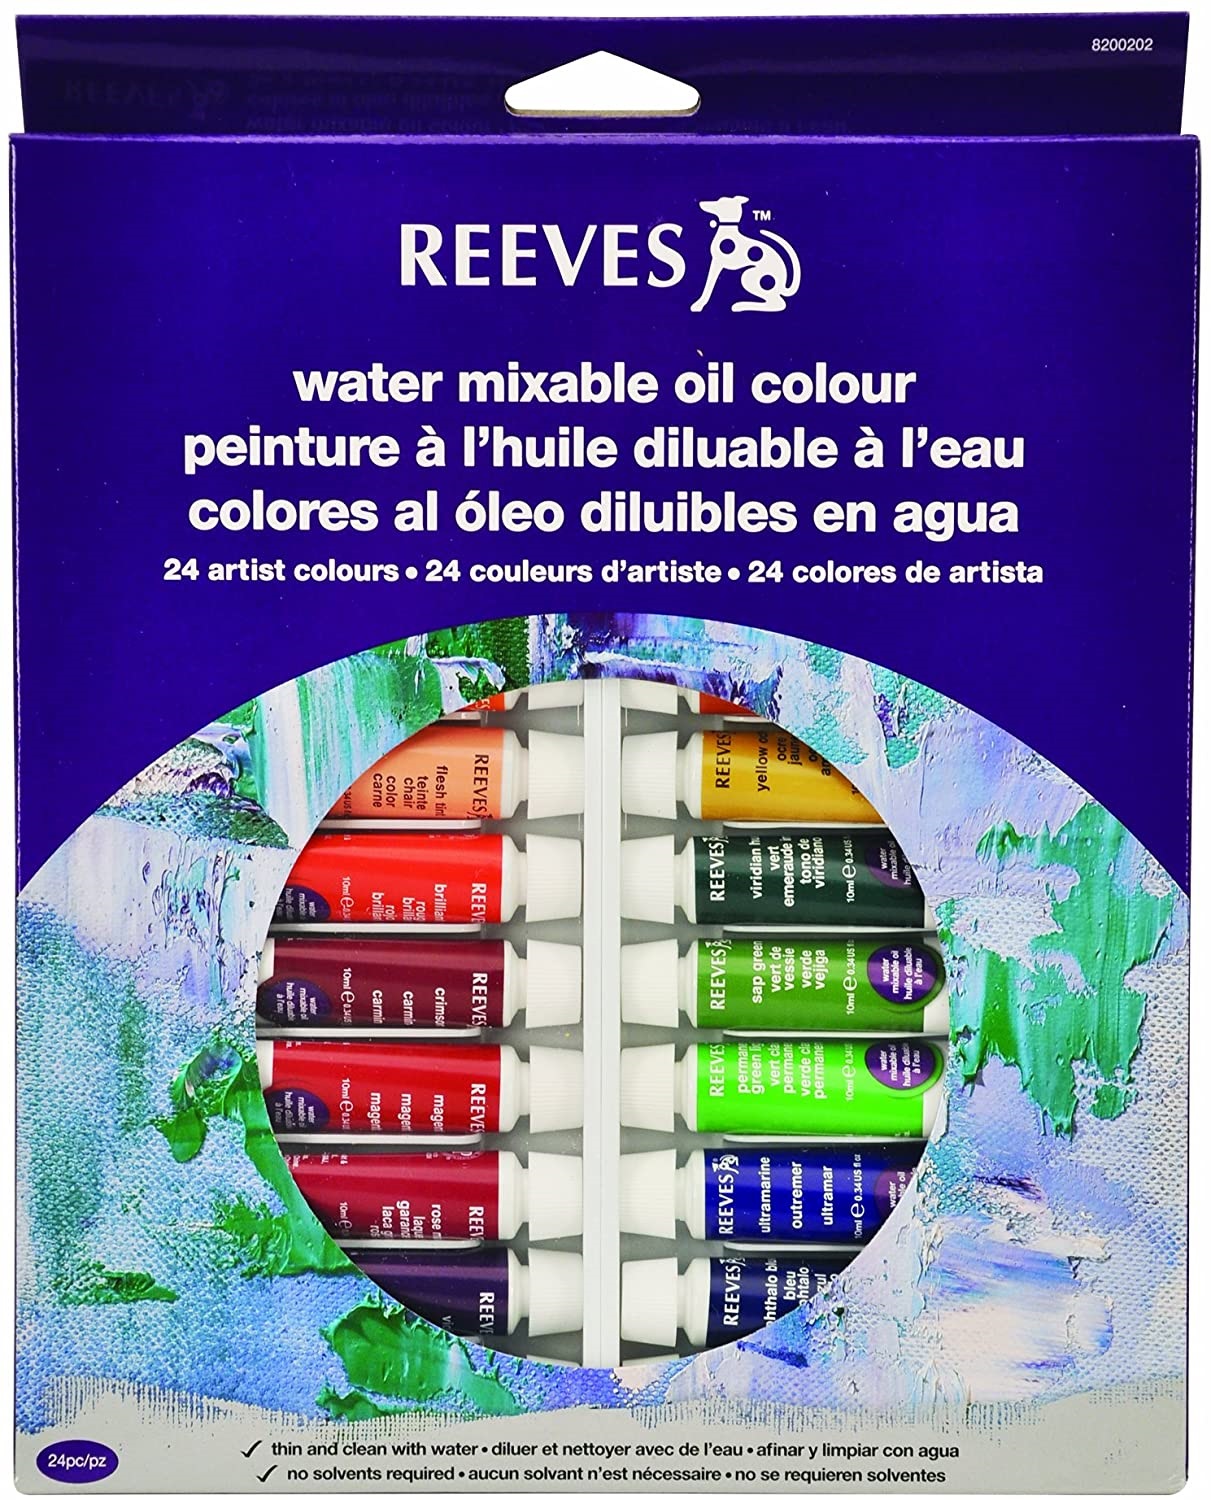 Reeves Water Mixable Oil Colour Artists Paint Tube Sets - 24x10ml 836392